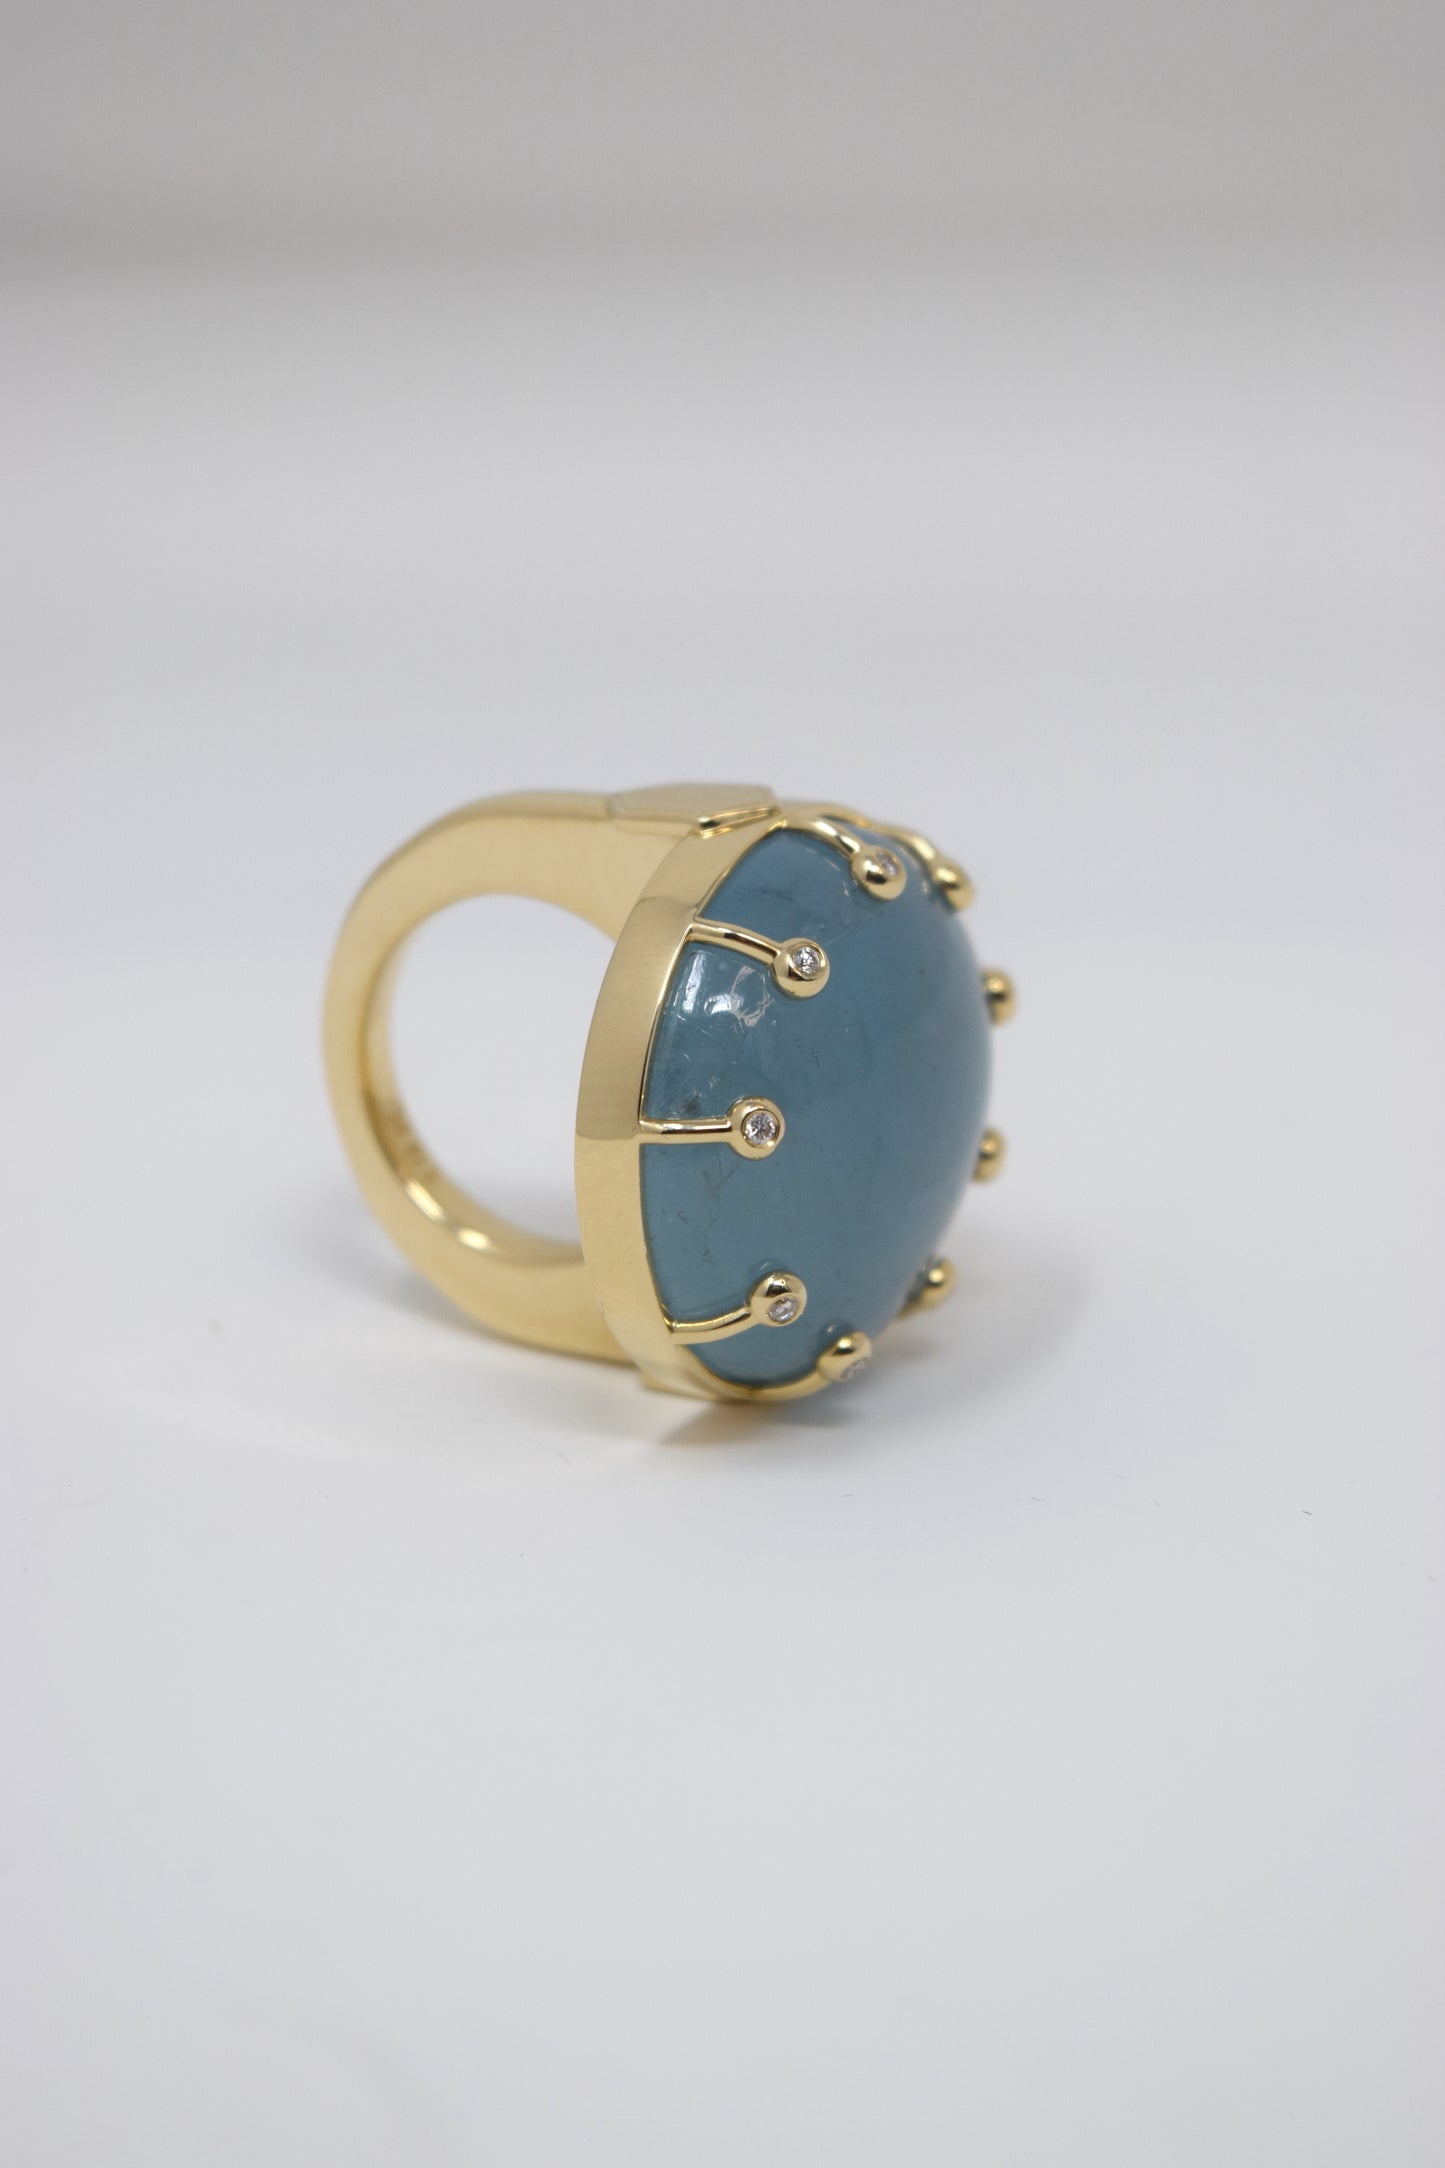 Solid 10k Gold Consort Ring with Large Oval Aquamarine Stone and x9 Diamonds